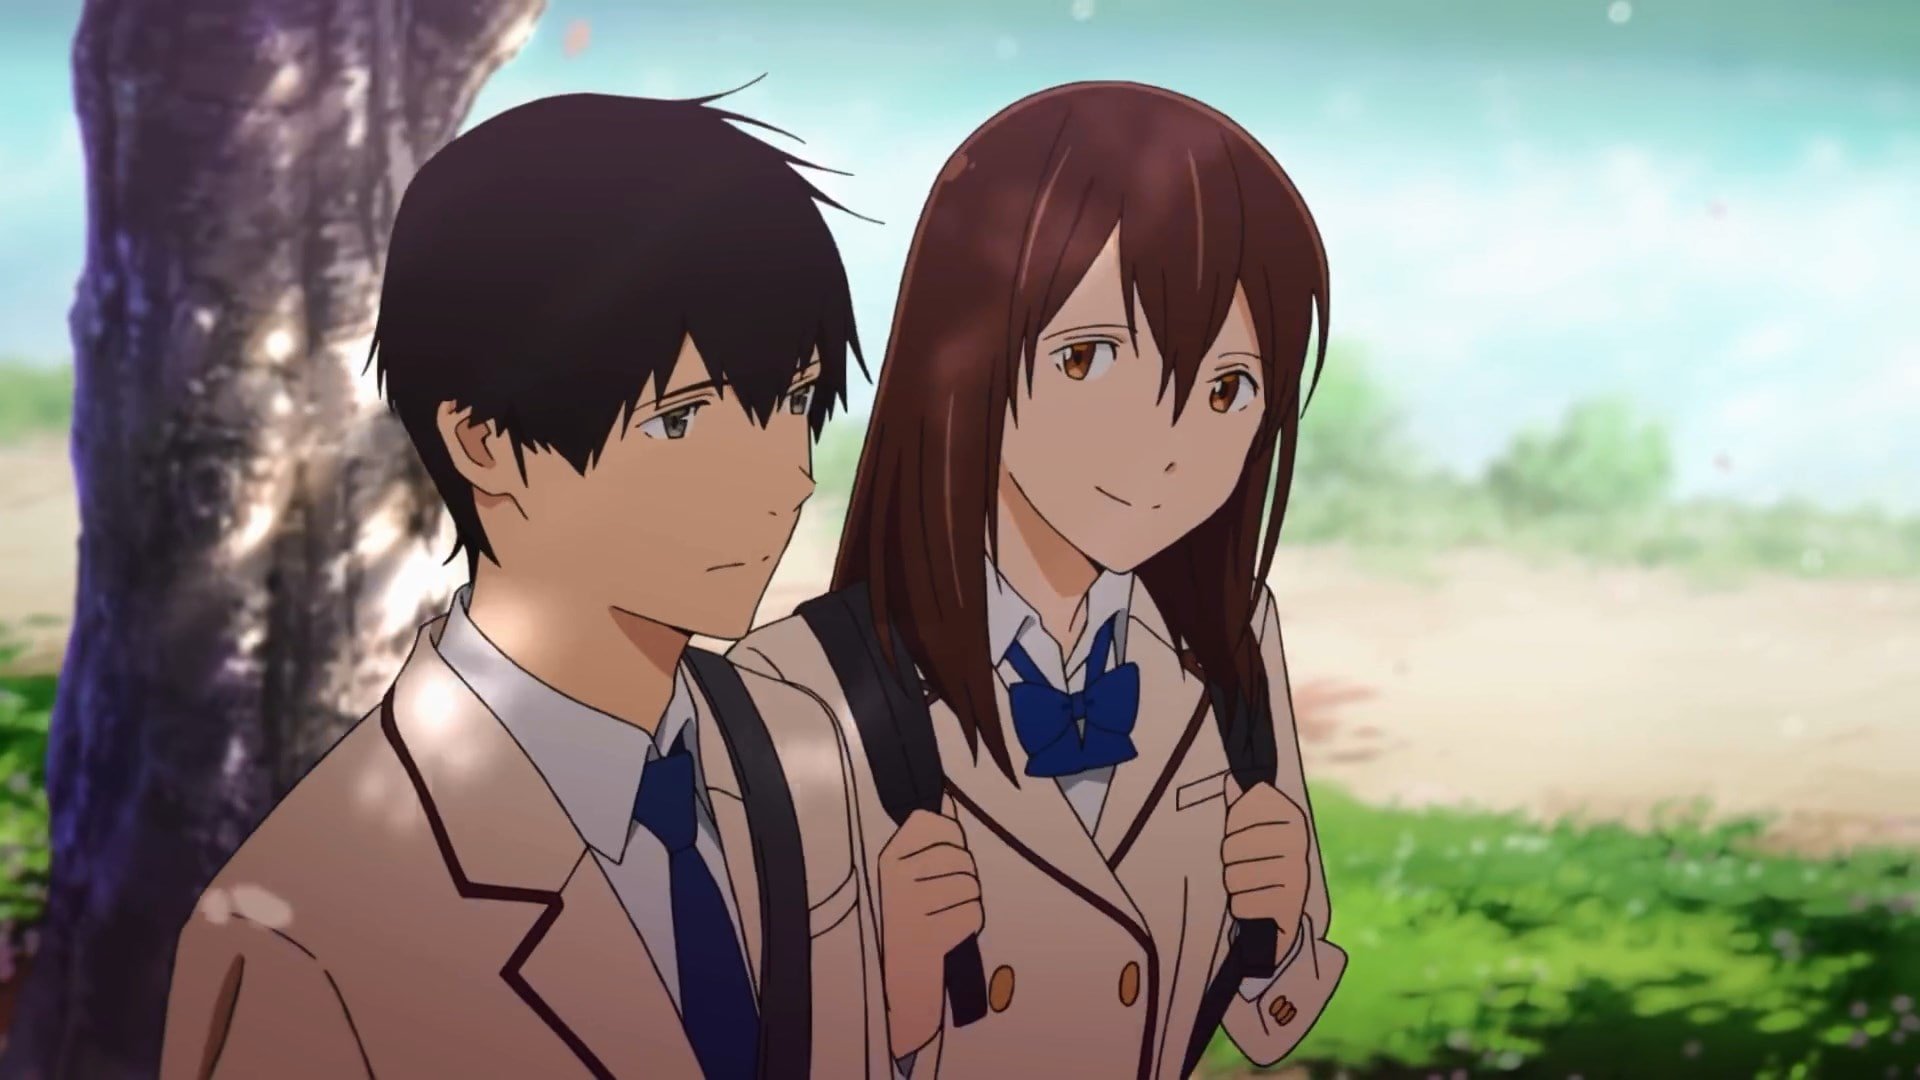 1663891826 Wallpaper Hd Anime I Want To Eat Your Pancreas Download